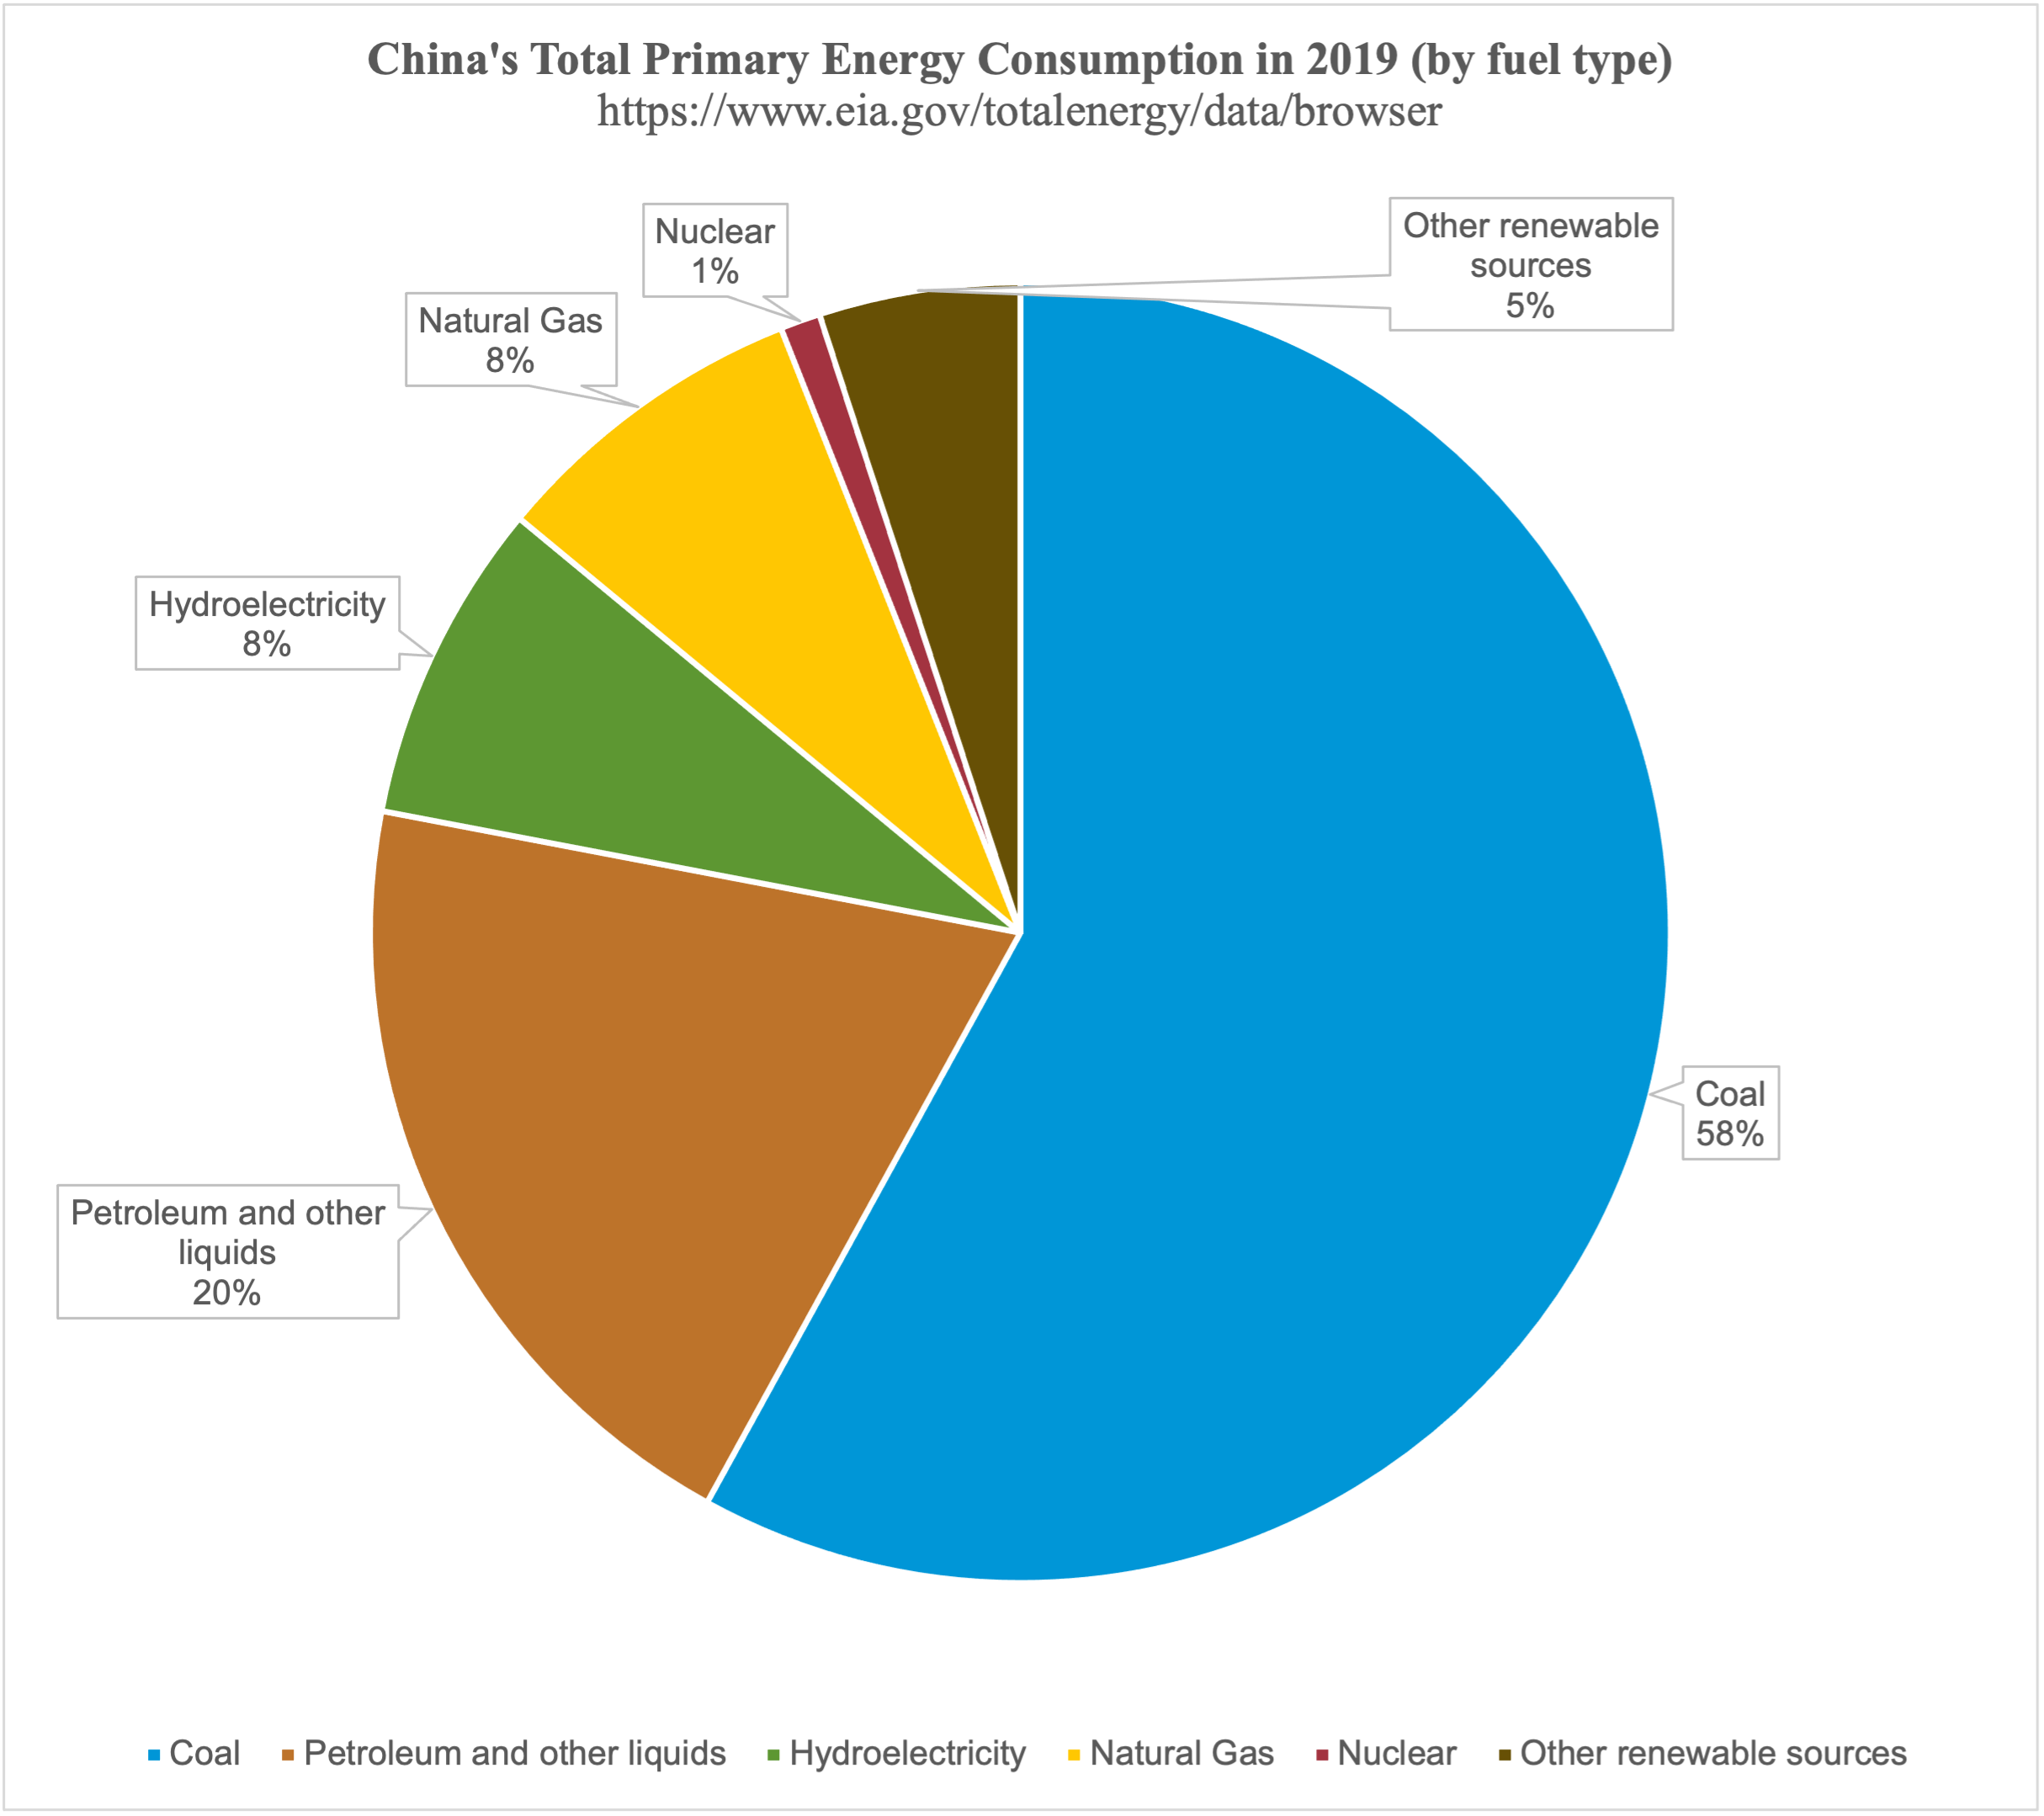 Figure 9. Chinas’s total primary energy consumption in 2019 (by fuel type) https://www.eia.gov/totalenergy/data/browser/